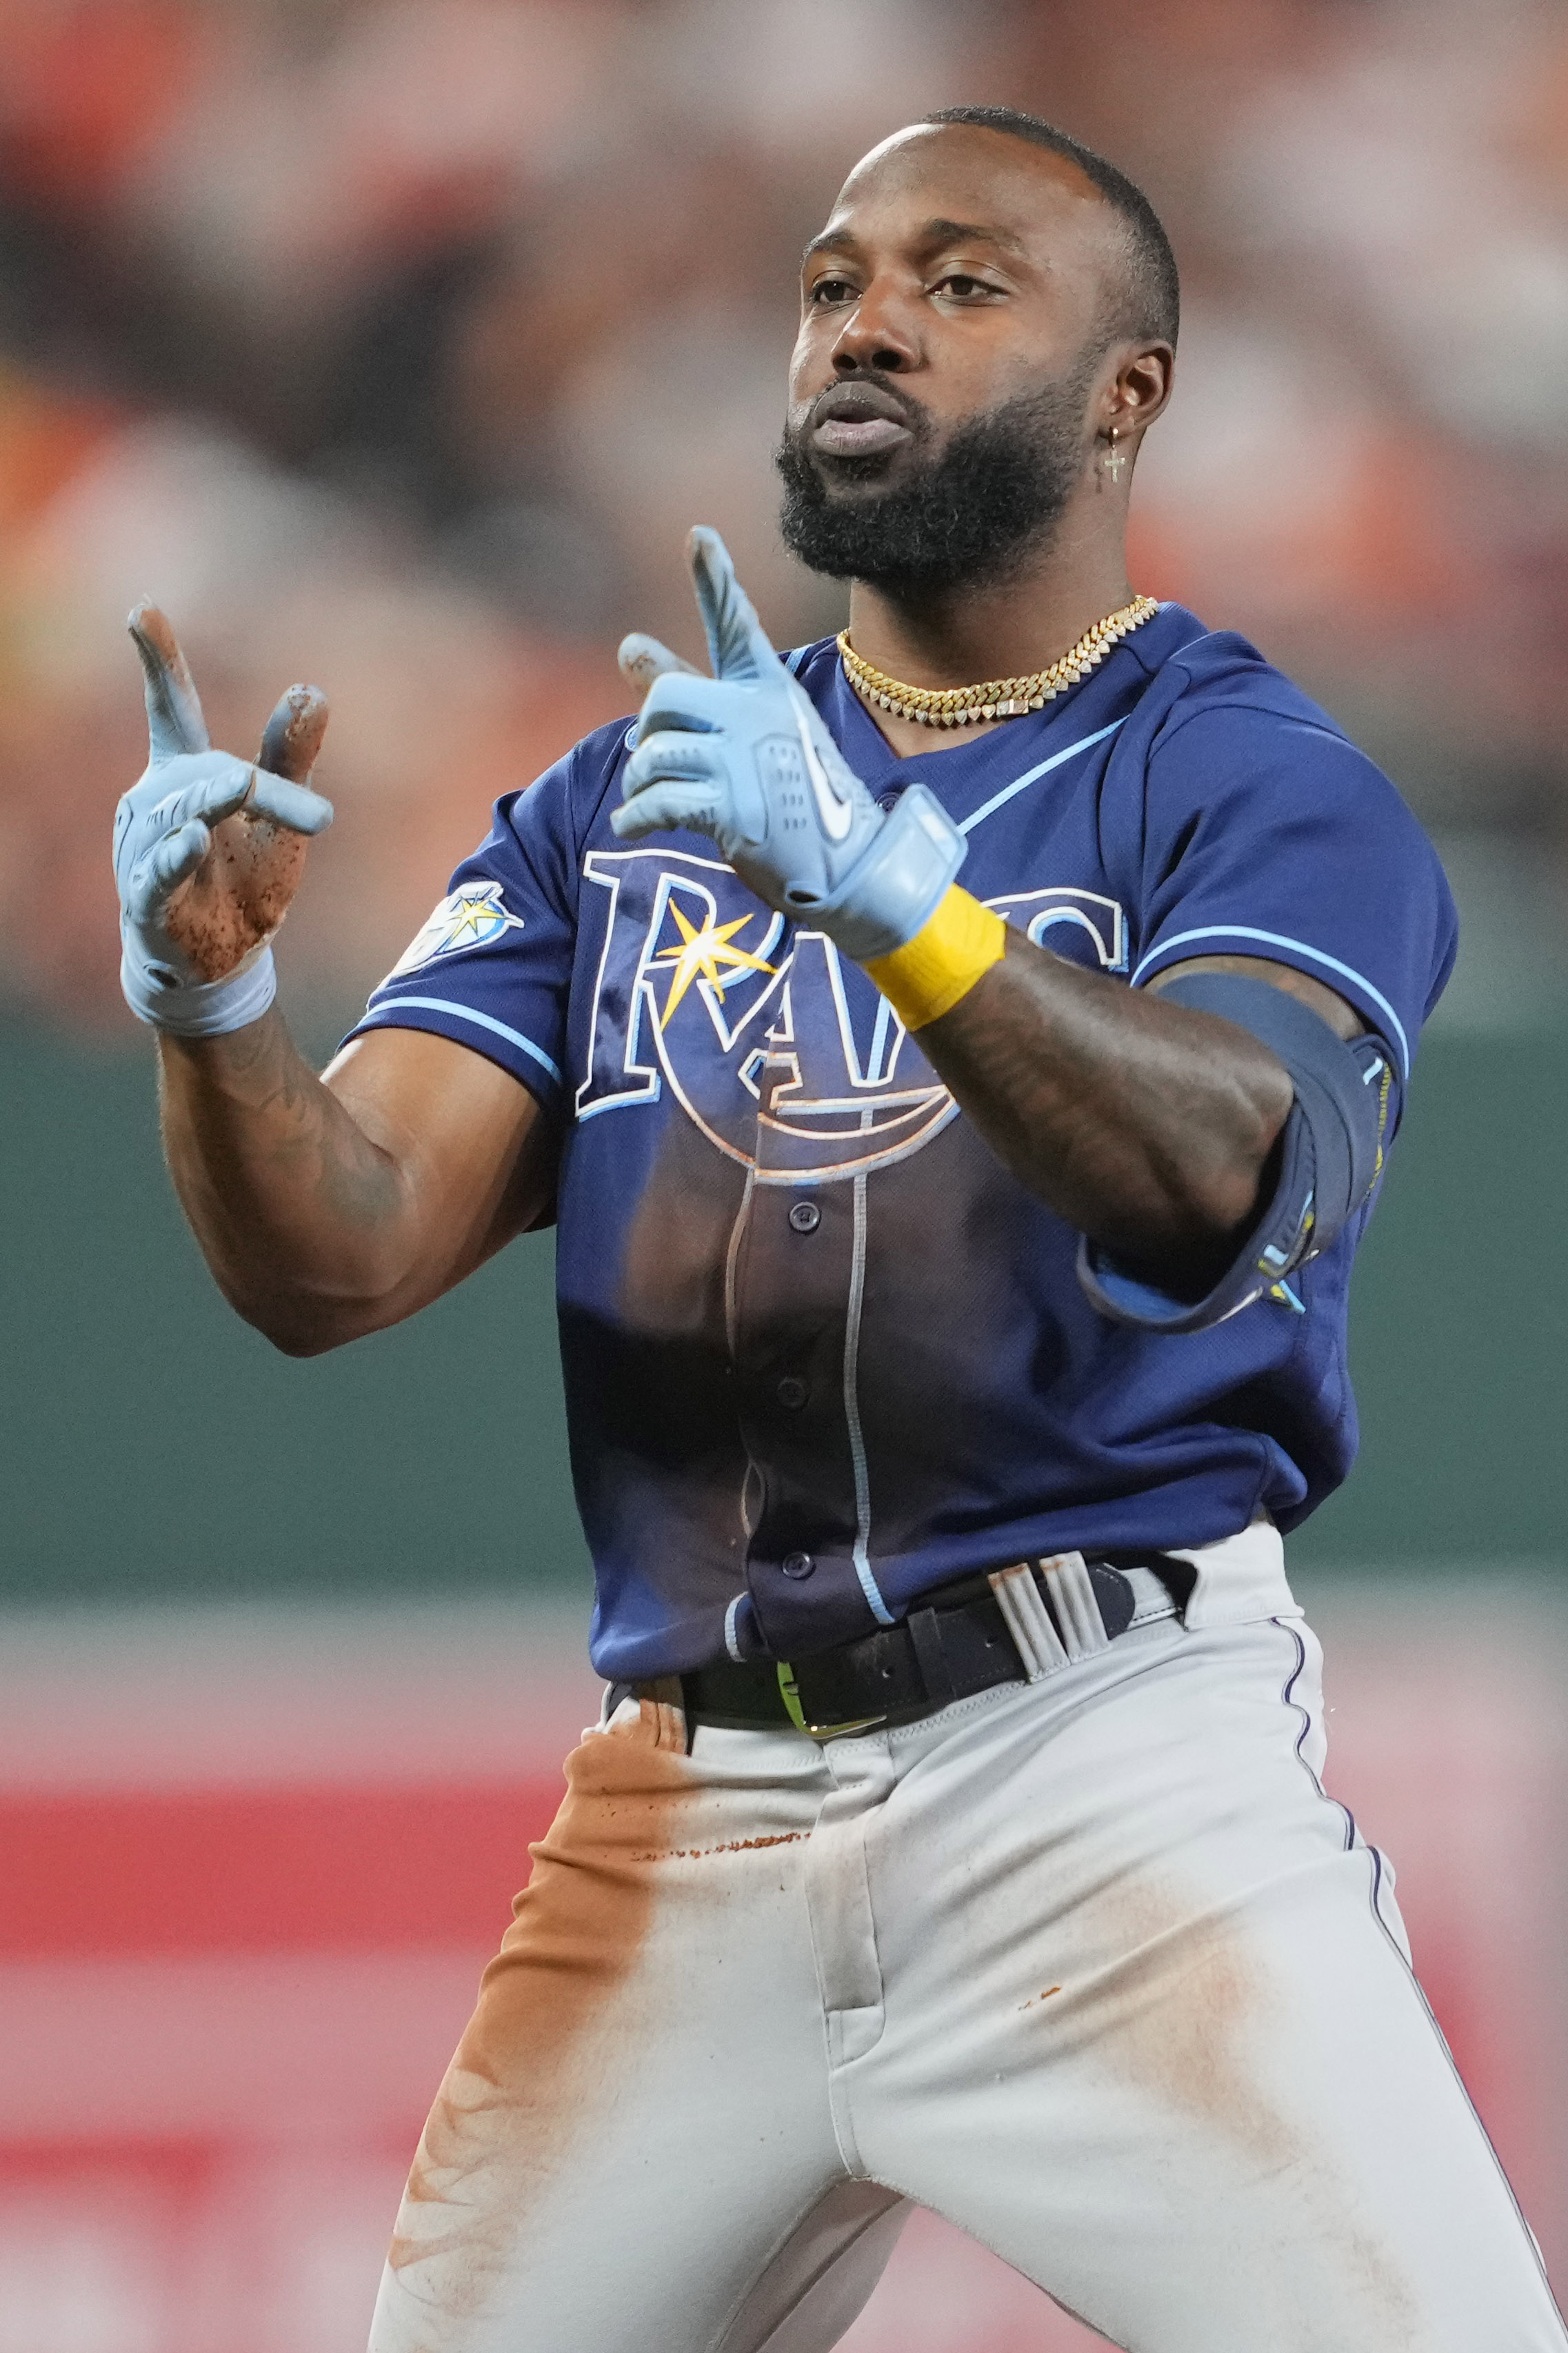 Tampa Bay Rays: 7, Baltimore Orioles: 1 - Start of Players